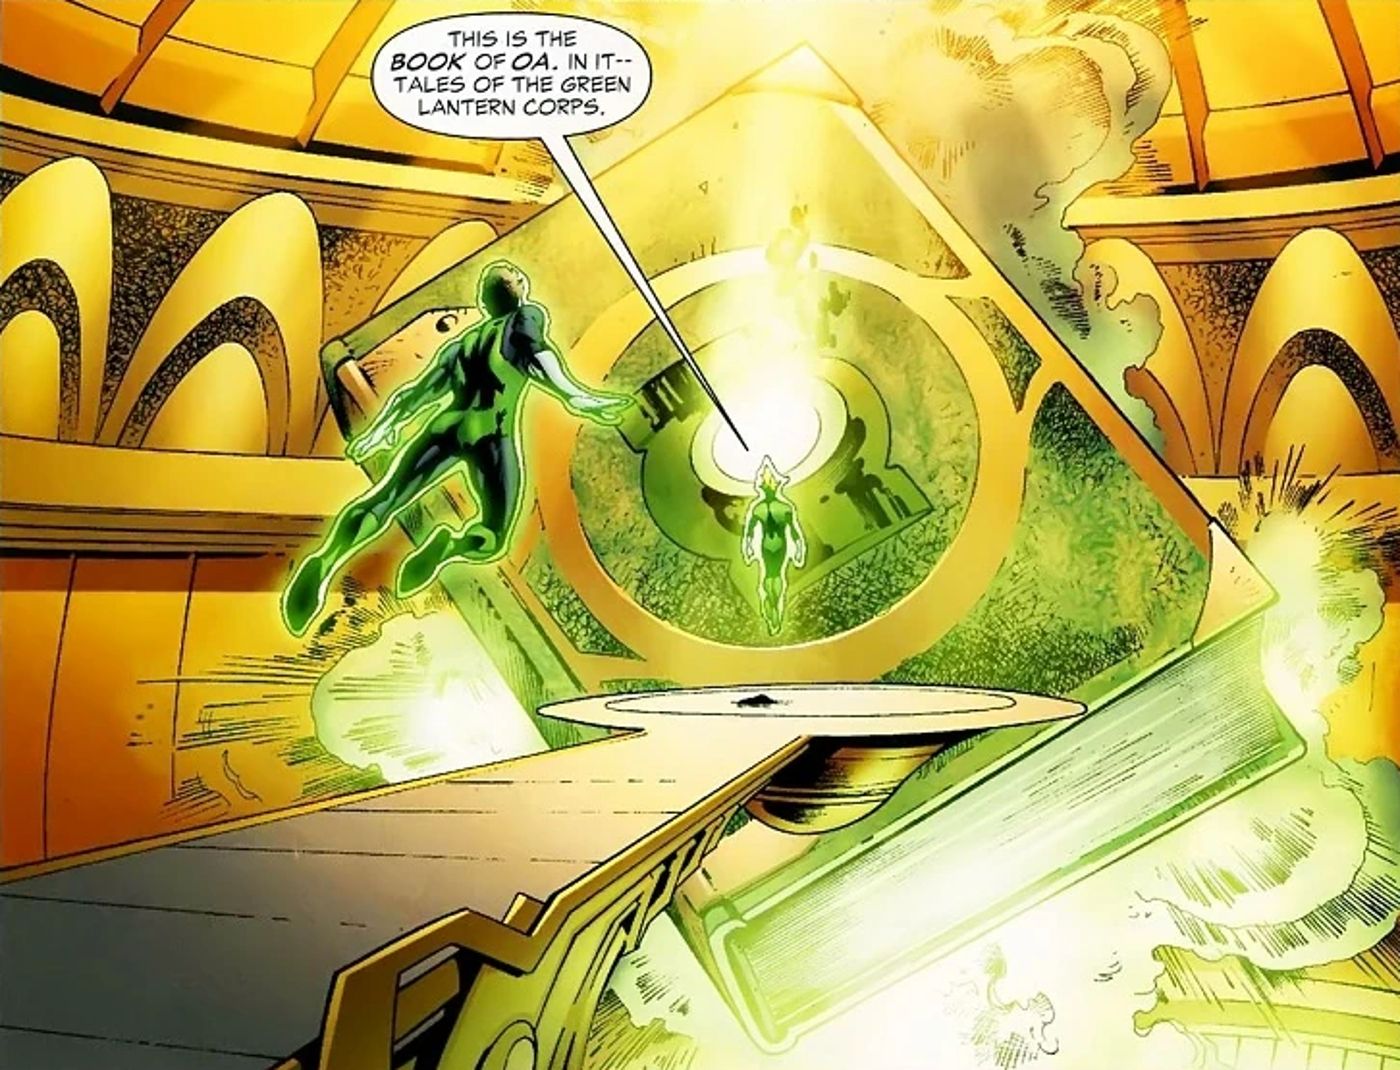 The Book of Oa and Two Green Lanterns DC